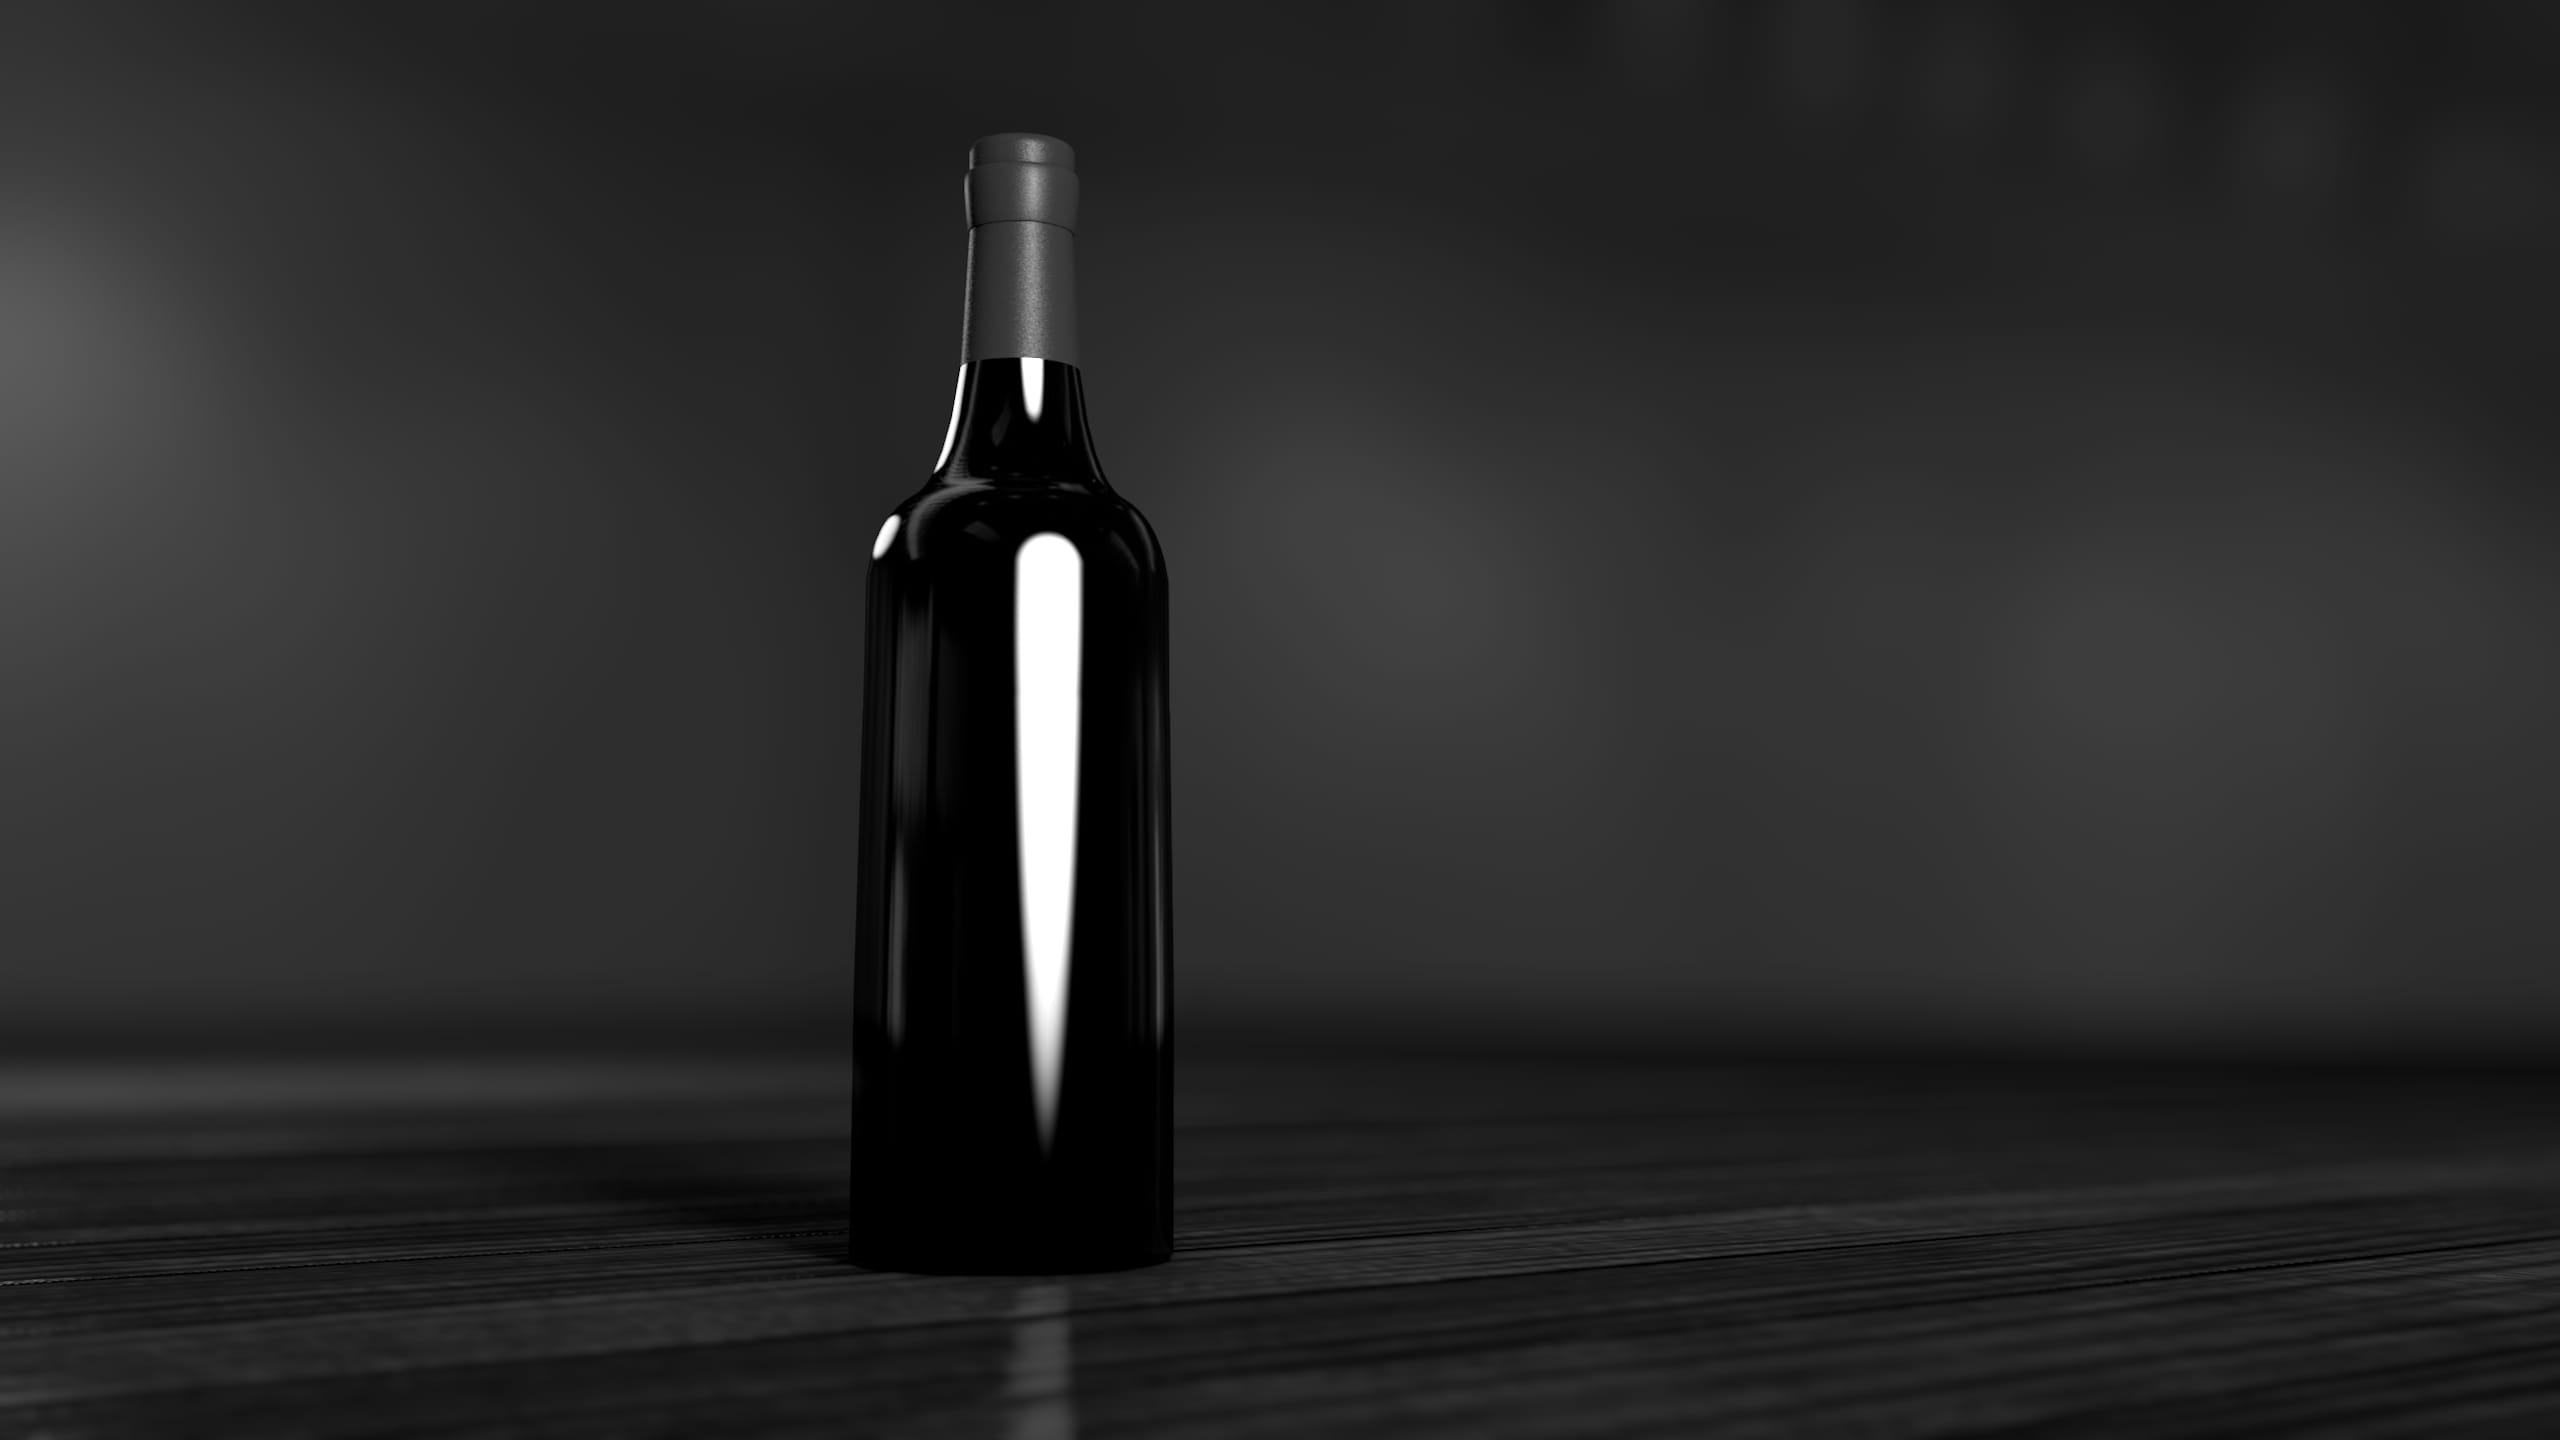 black glass bottle on brown surface, bottle on top of table, background